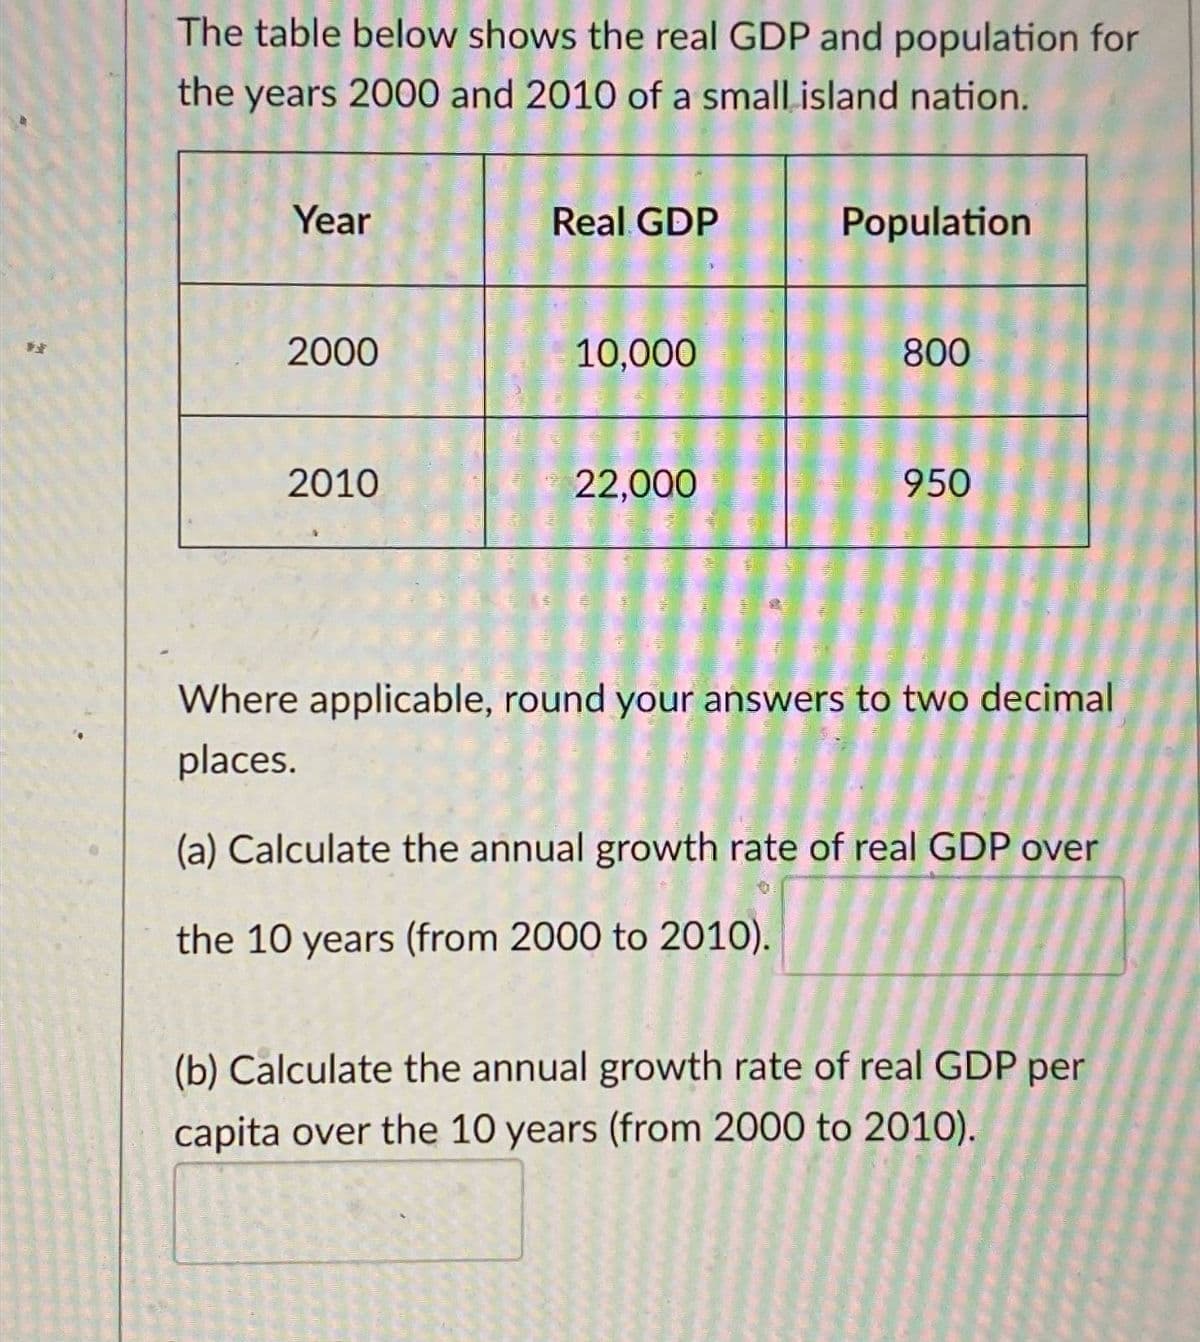 The table below shows the real GDP and population for
the years 2000 and 2010 of a small island nation.
Year
Real GDP
Population
發
2000
10,000
800
2010
22,000
950
Where applicable, round your answers to two decimal
places.
(a) Calculate the annual growth rate of real GDP over
the 10 years (from 2000 to 2010).
(b) Calculate the annual growth rate of real GDP per
capita over the 10 years (from 2000 to 2010).